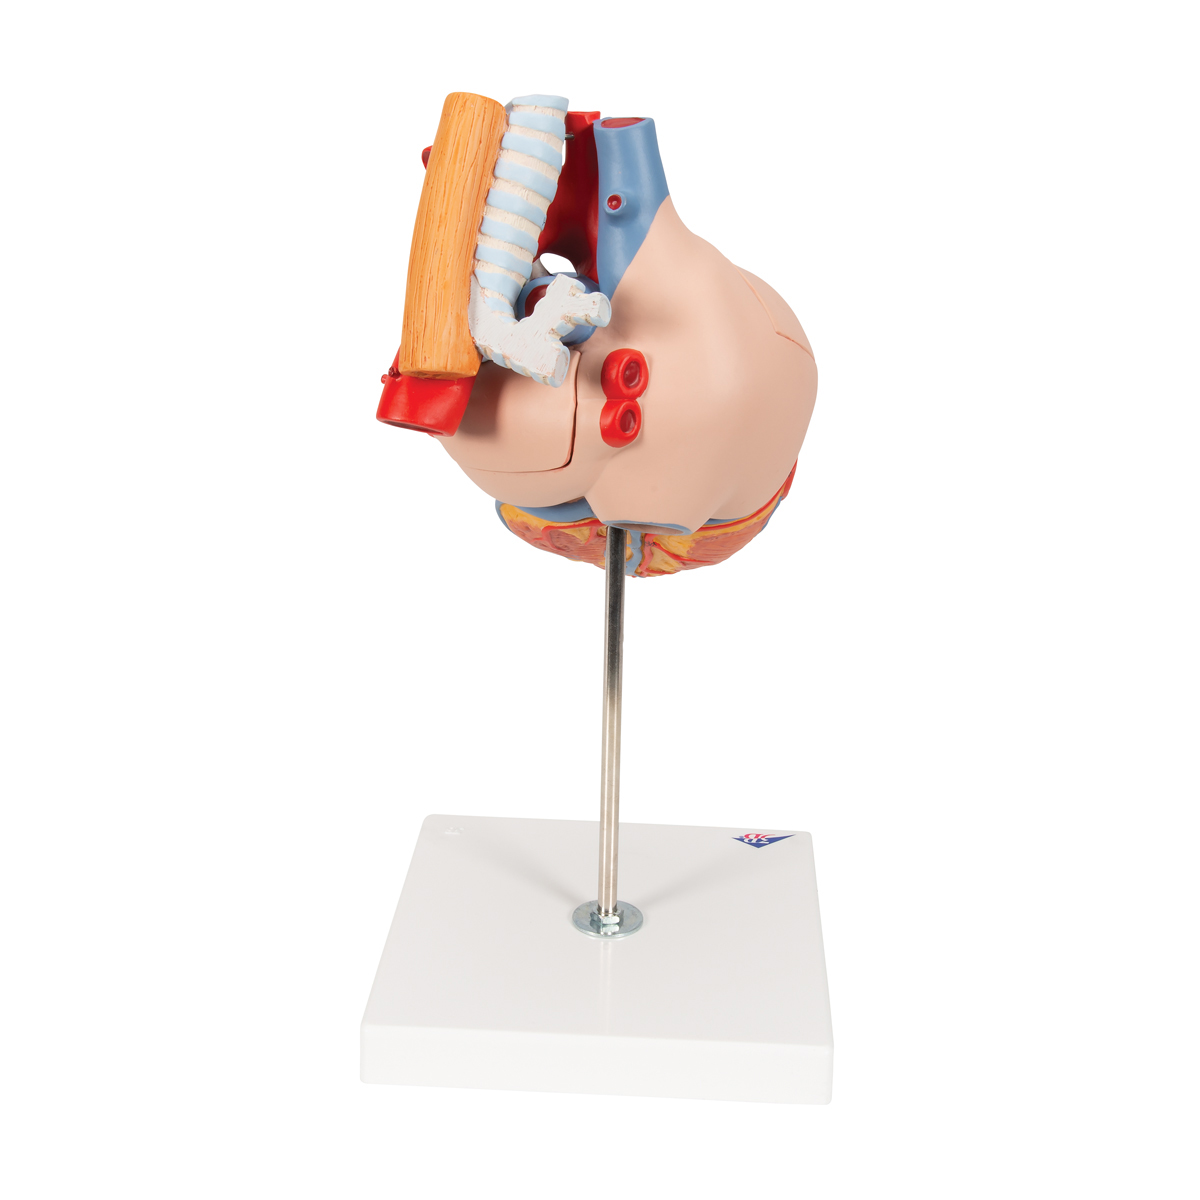 Anatomical Heart Model | Anatomy of the Heart | Heart Model with